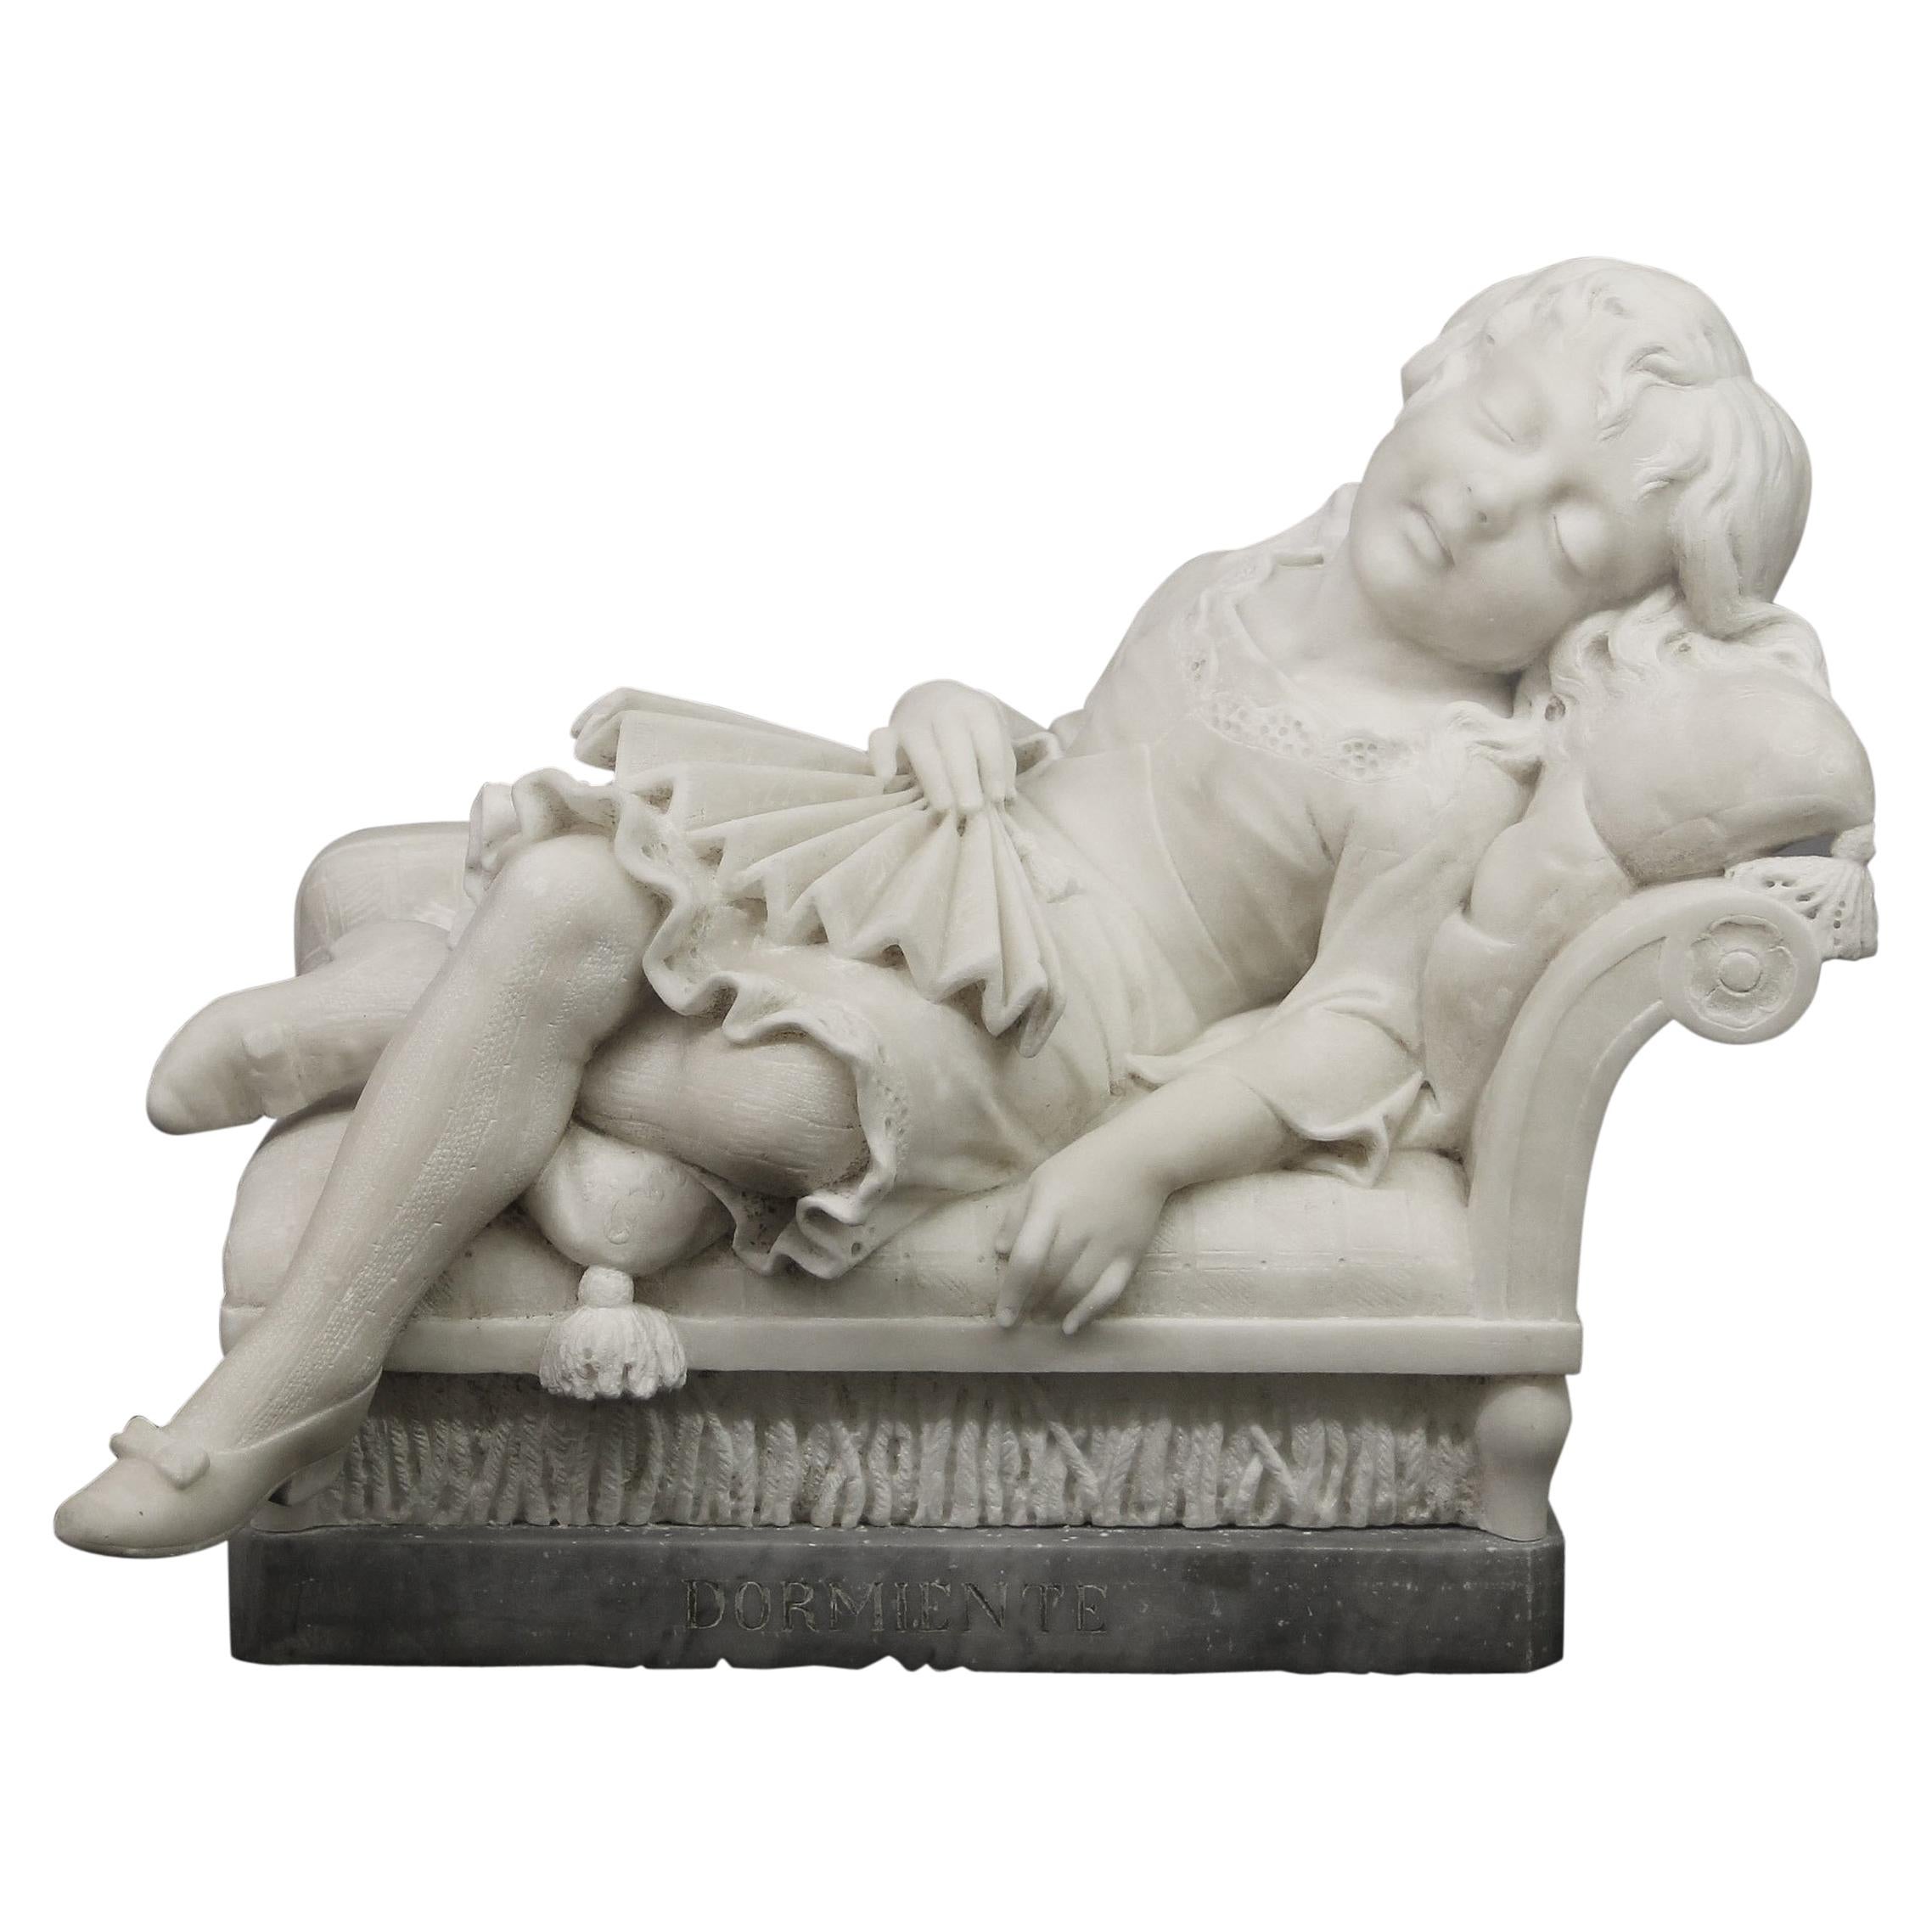 Late 19th Century White Carrara Marble Entitled "Dormiente" by Prof. Romanelli